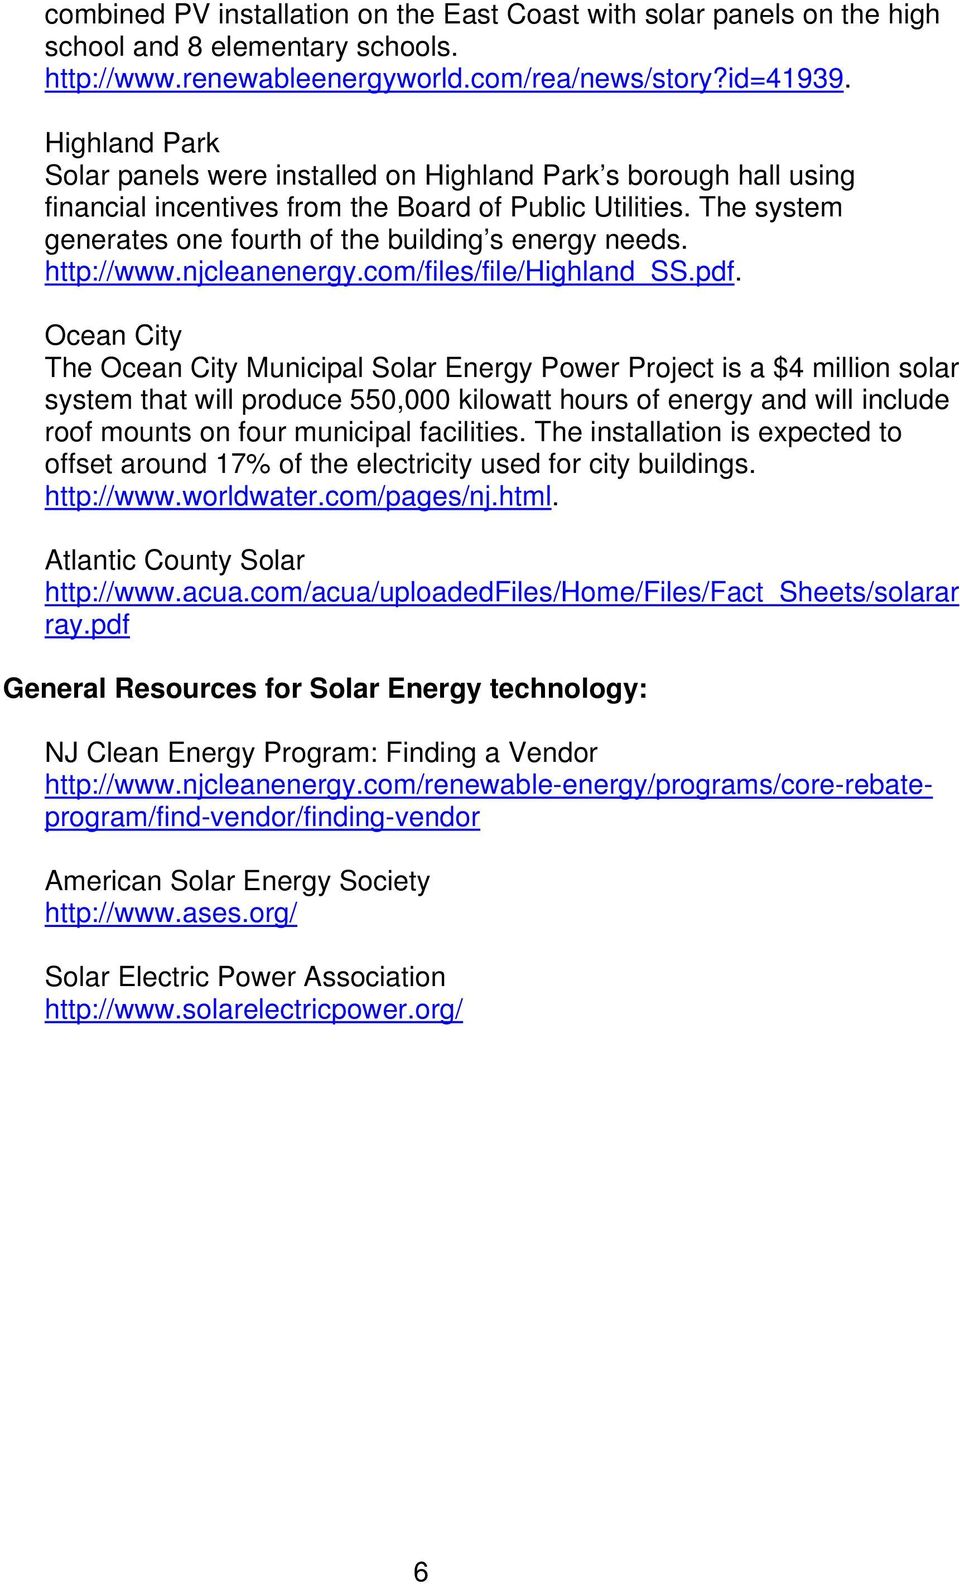 http://www.njcleanenergy.com/files/file/highland_ss.pdf.